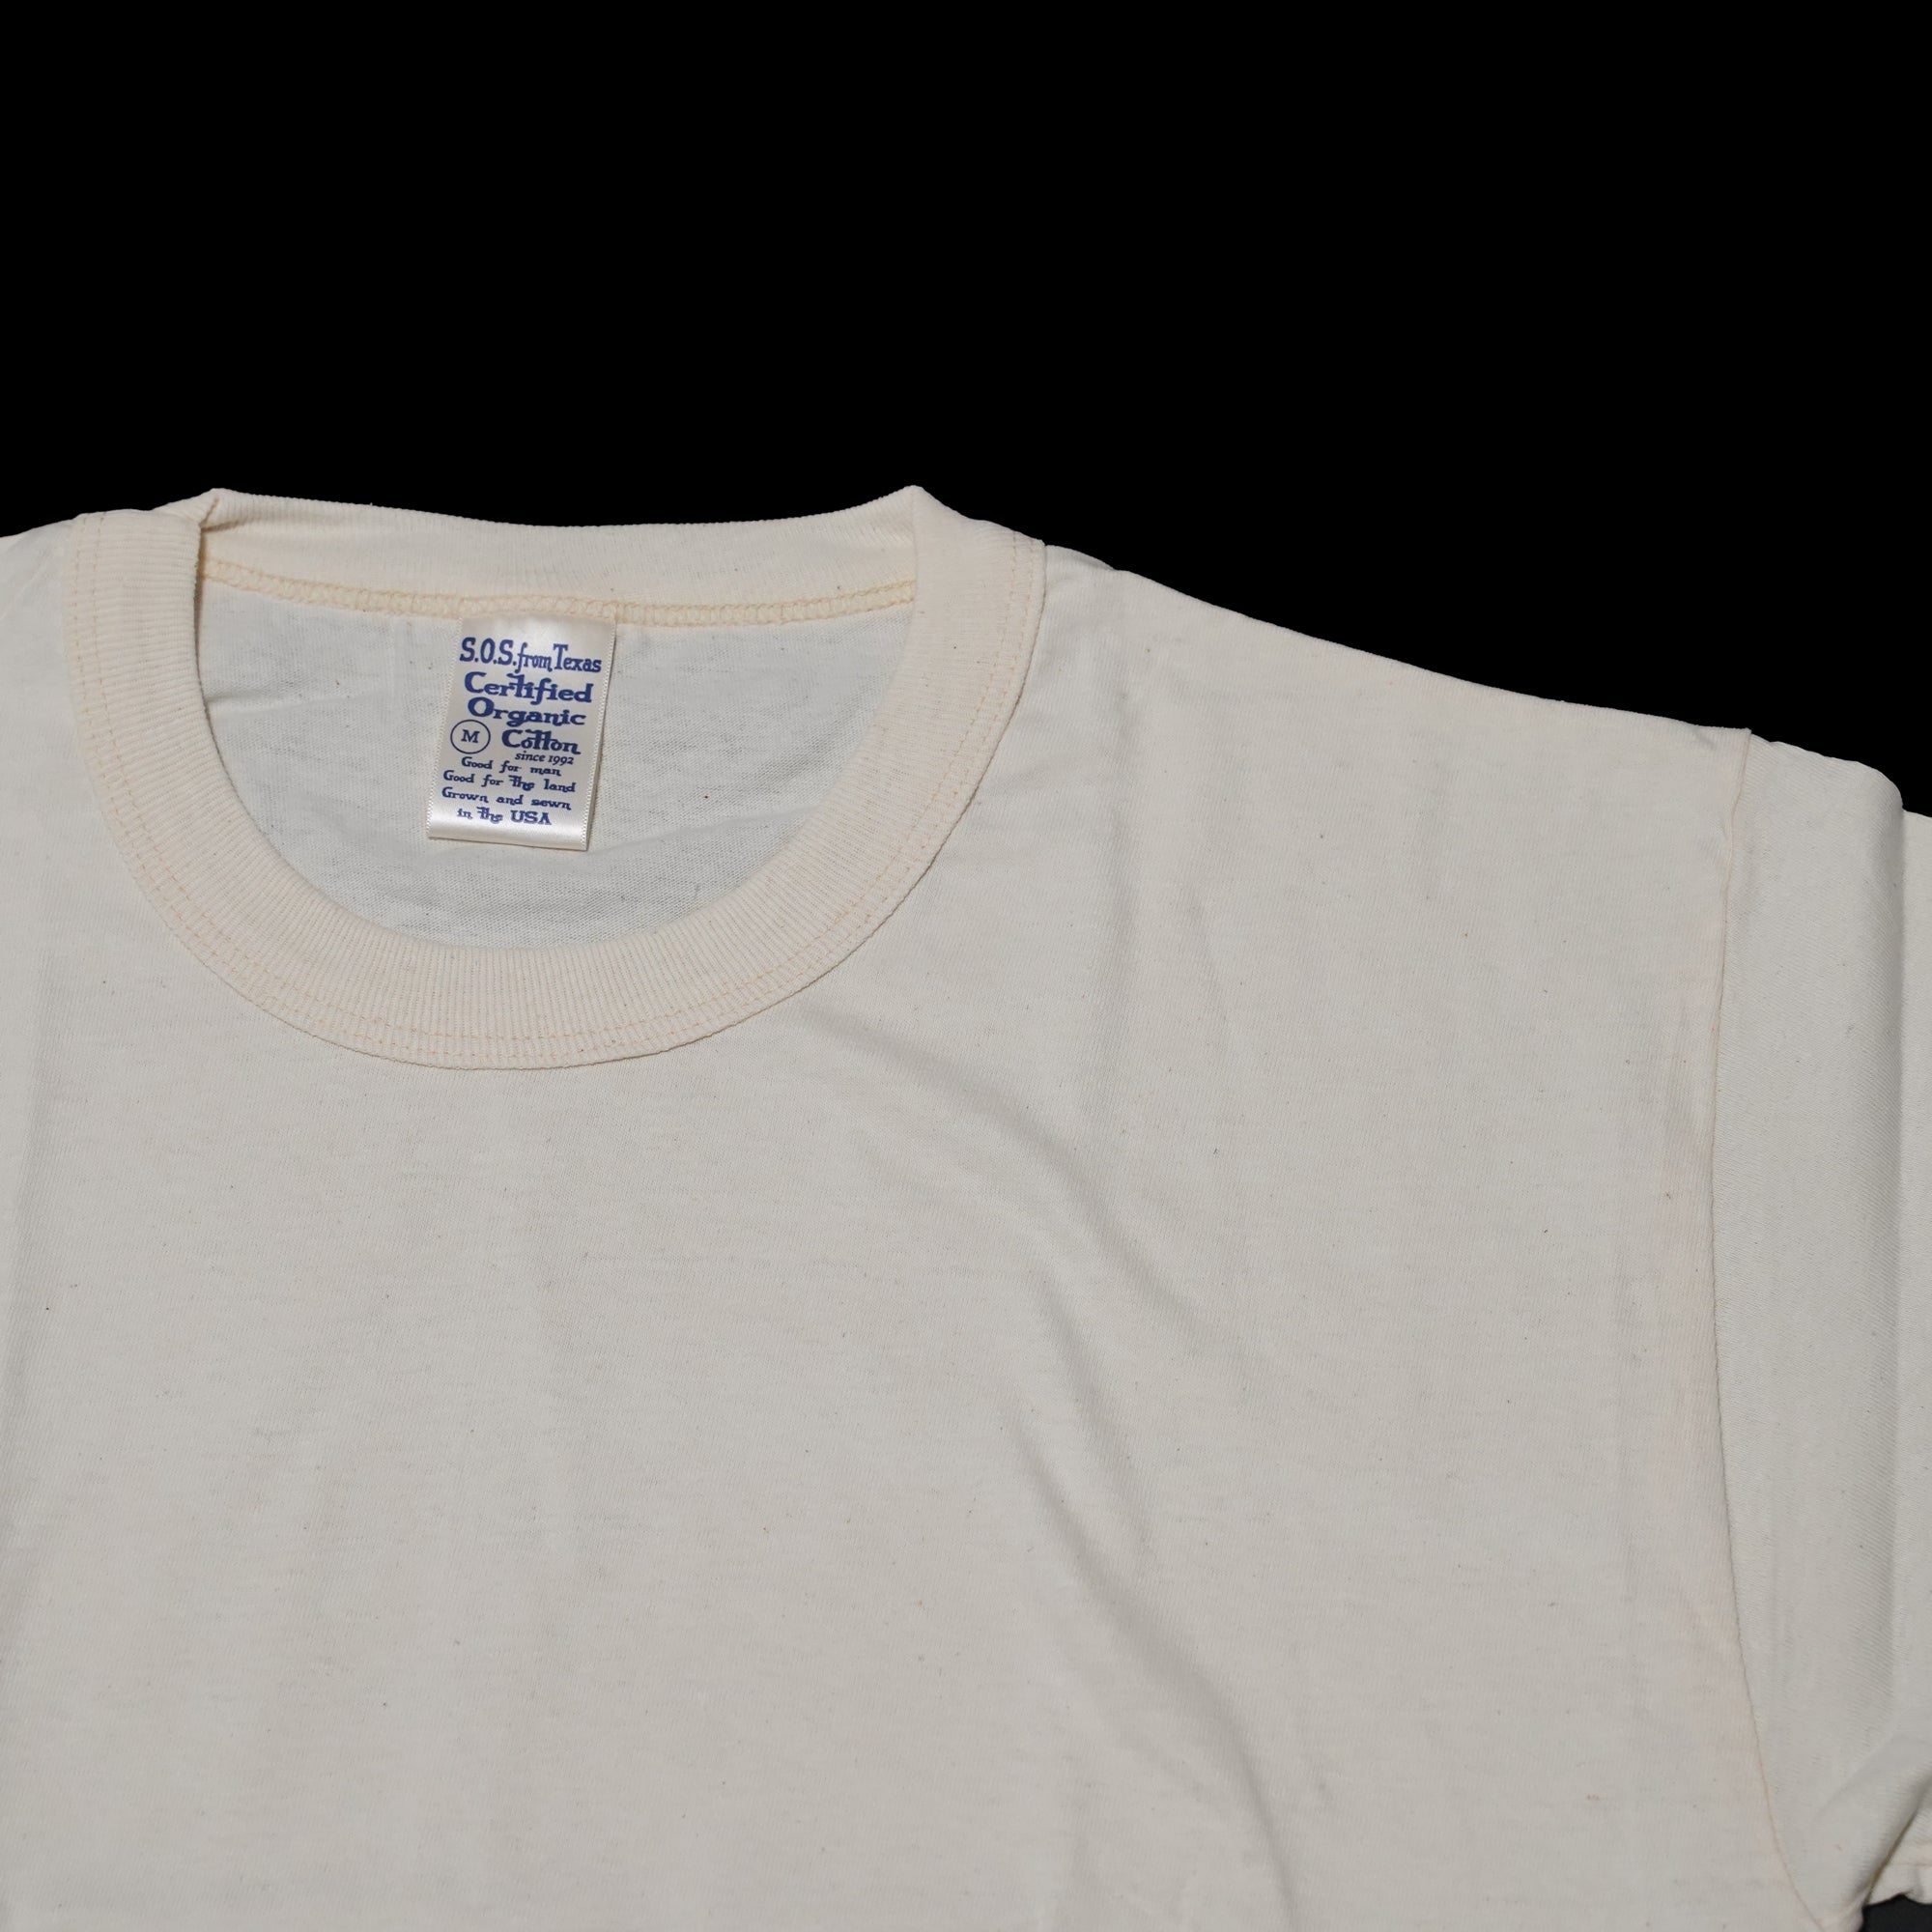 No:ST-1000 | Name: S/S CREW TEE | Color:Natural | Size:M/L 【Save Our Soil】-SAVE OUR SOIL-ADDICTION FUKUOKA